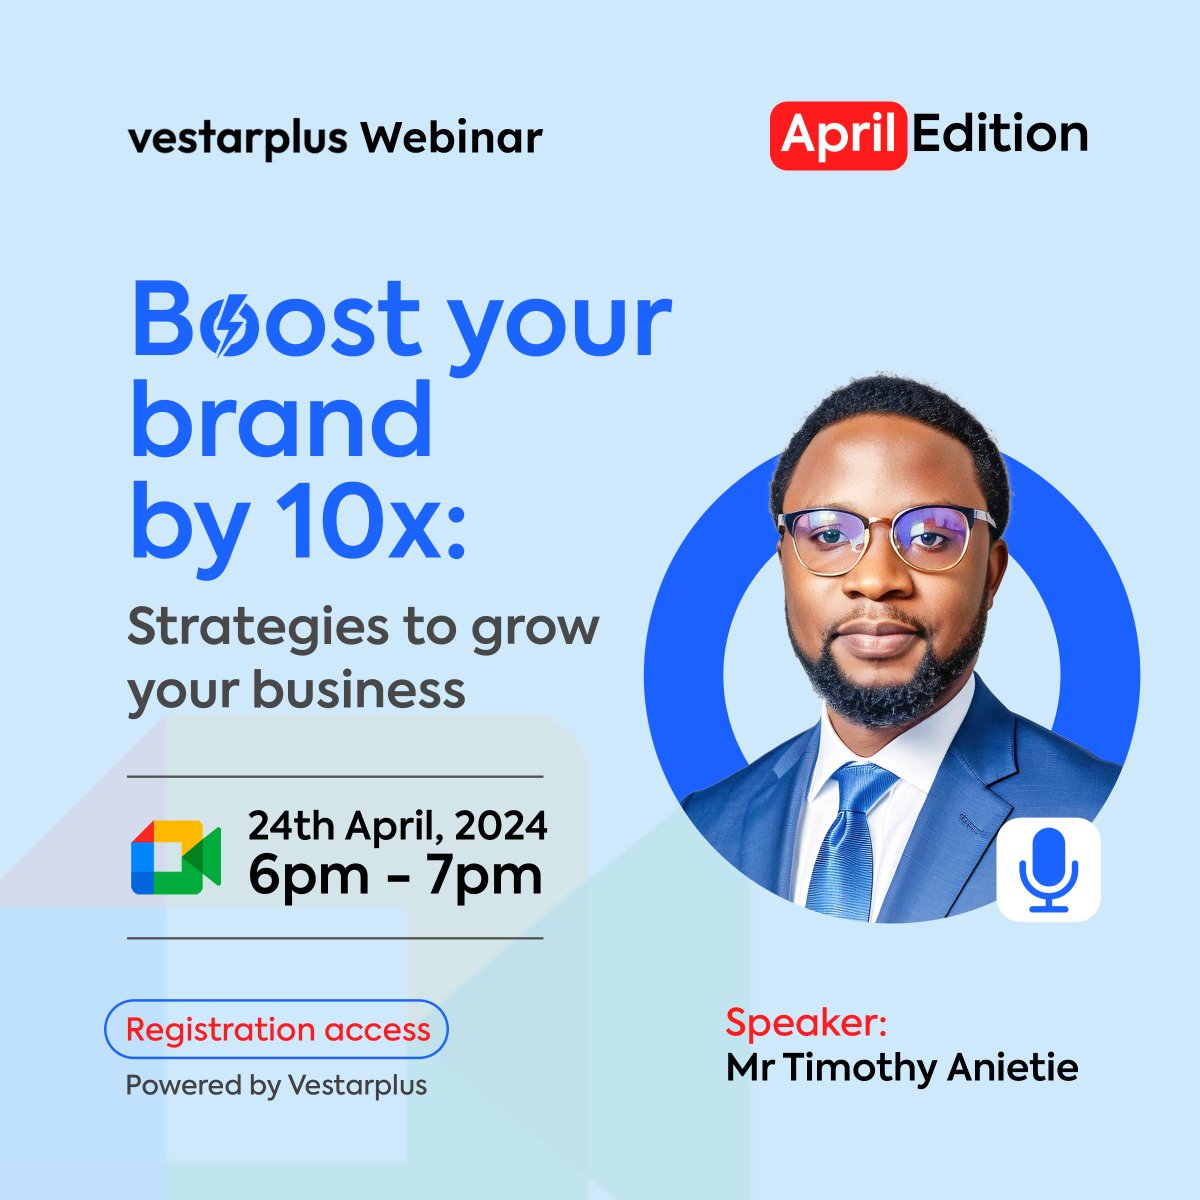 Boost your brand by 10x..... Join us for an incredible webinar session on April 24, 2024, featuring our special guest speaker, @timothy_anietie. Our bio contains a link. #rebranding #businessstrategy #businessowner #business #webinar #businessgrowth